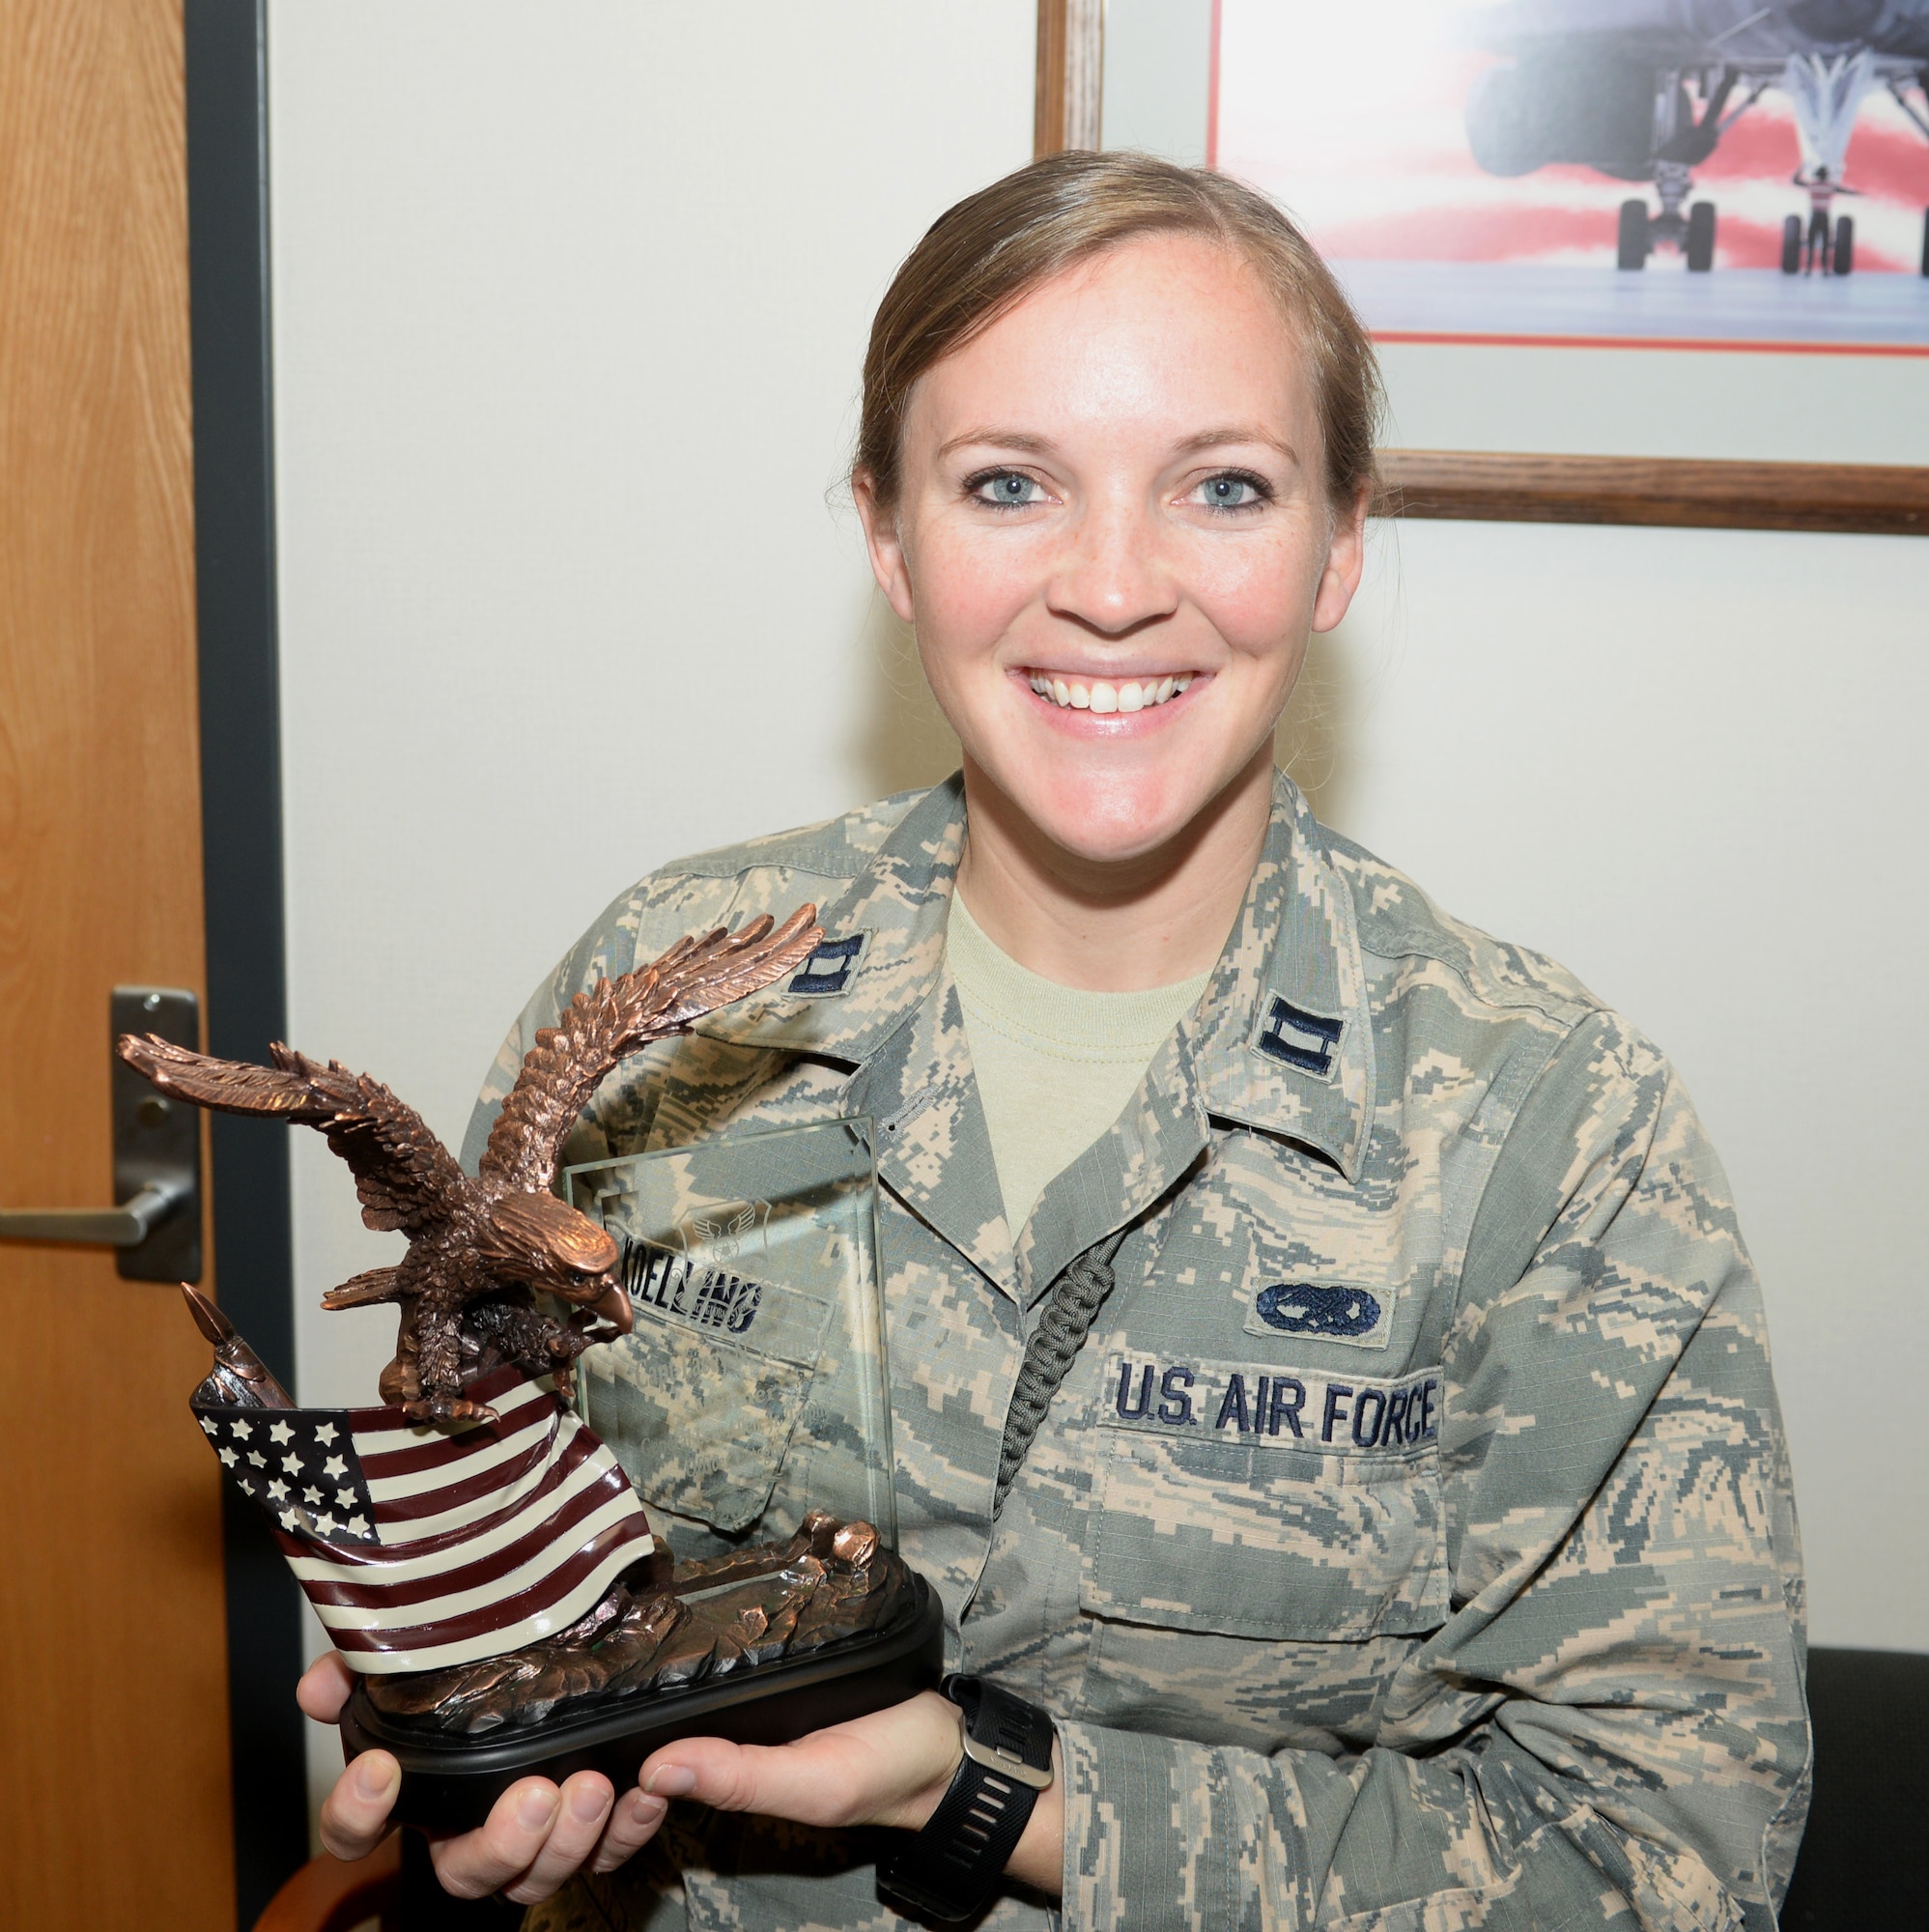 Capt. Lacey Koelling, officer in charge of the 34th Aircraft Maintenance Unit, stands with the General Lew Allen, Jr., Trophy Ellsworth Air Force Base, S.D., Sept. 26, 2017. Koelling and her team earned the award for their outstanding actions in sortie generations and leadership at Al-Dhafra Air Base in the United Arab Emirates. (U.S. Air Force photo by Airman 1st Class Thomas Karol)